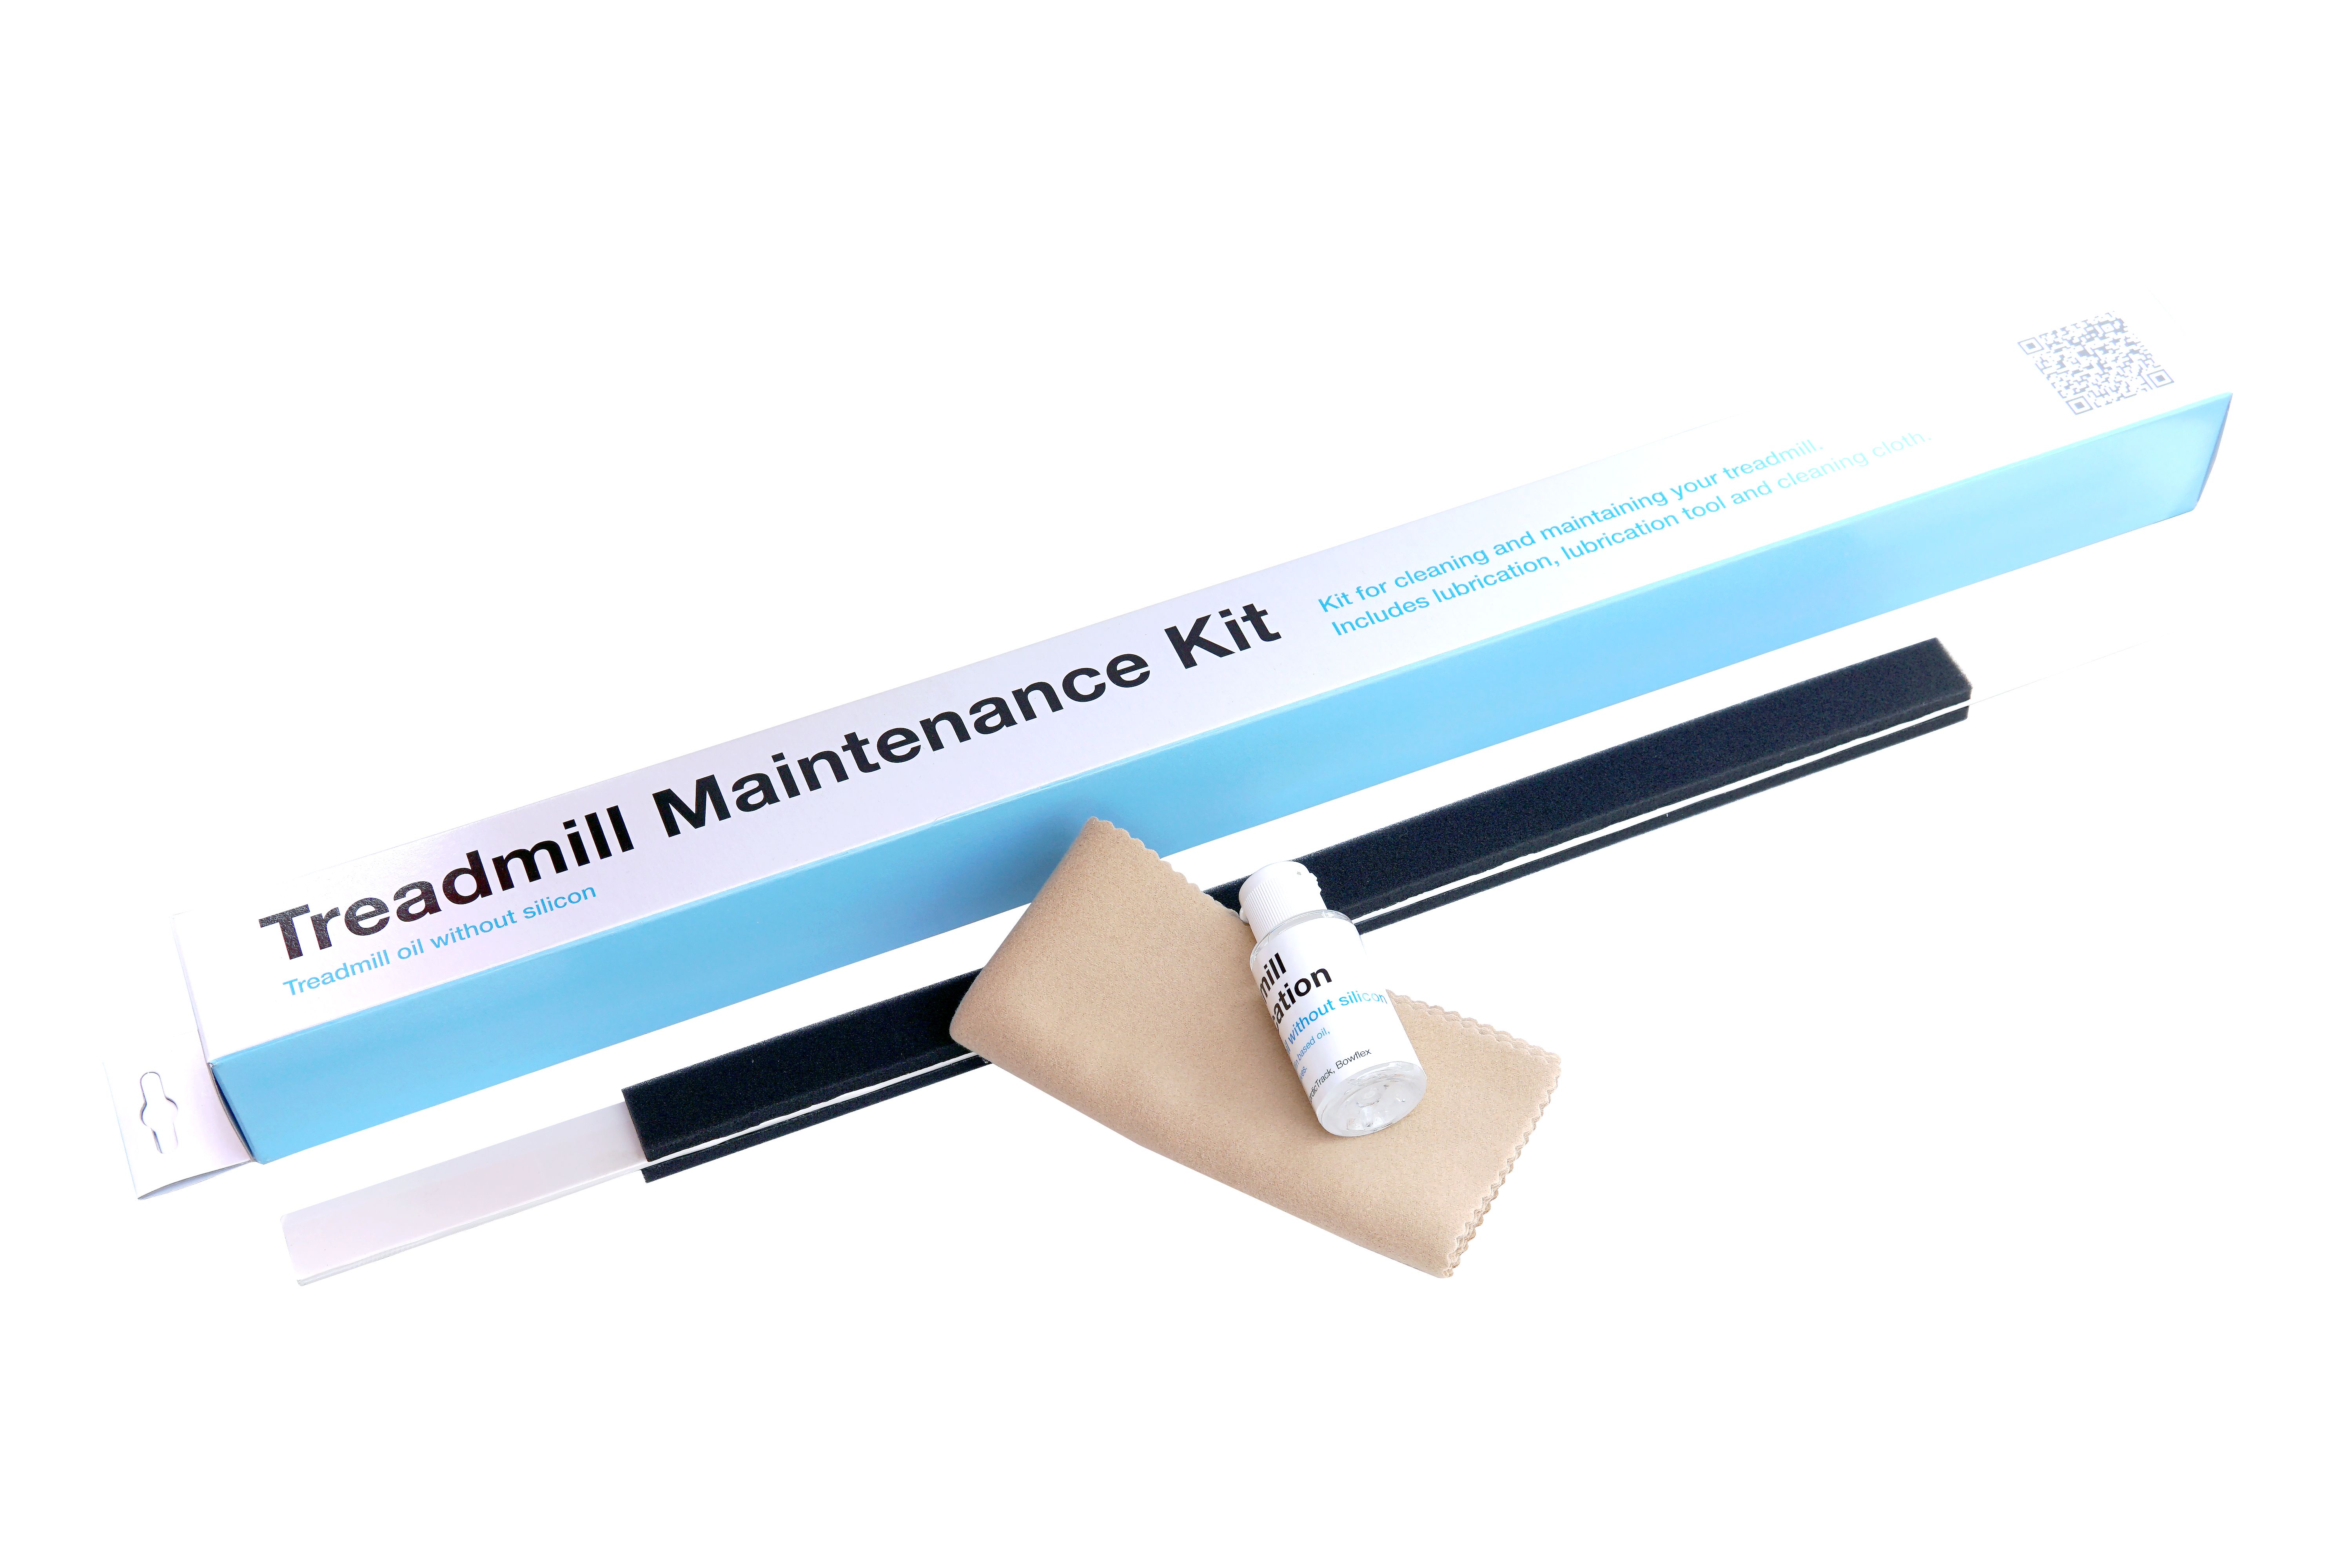 Treadmill Maintenance kit oil without Silicon